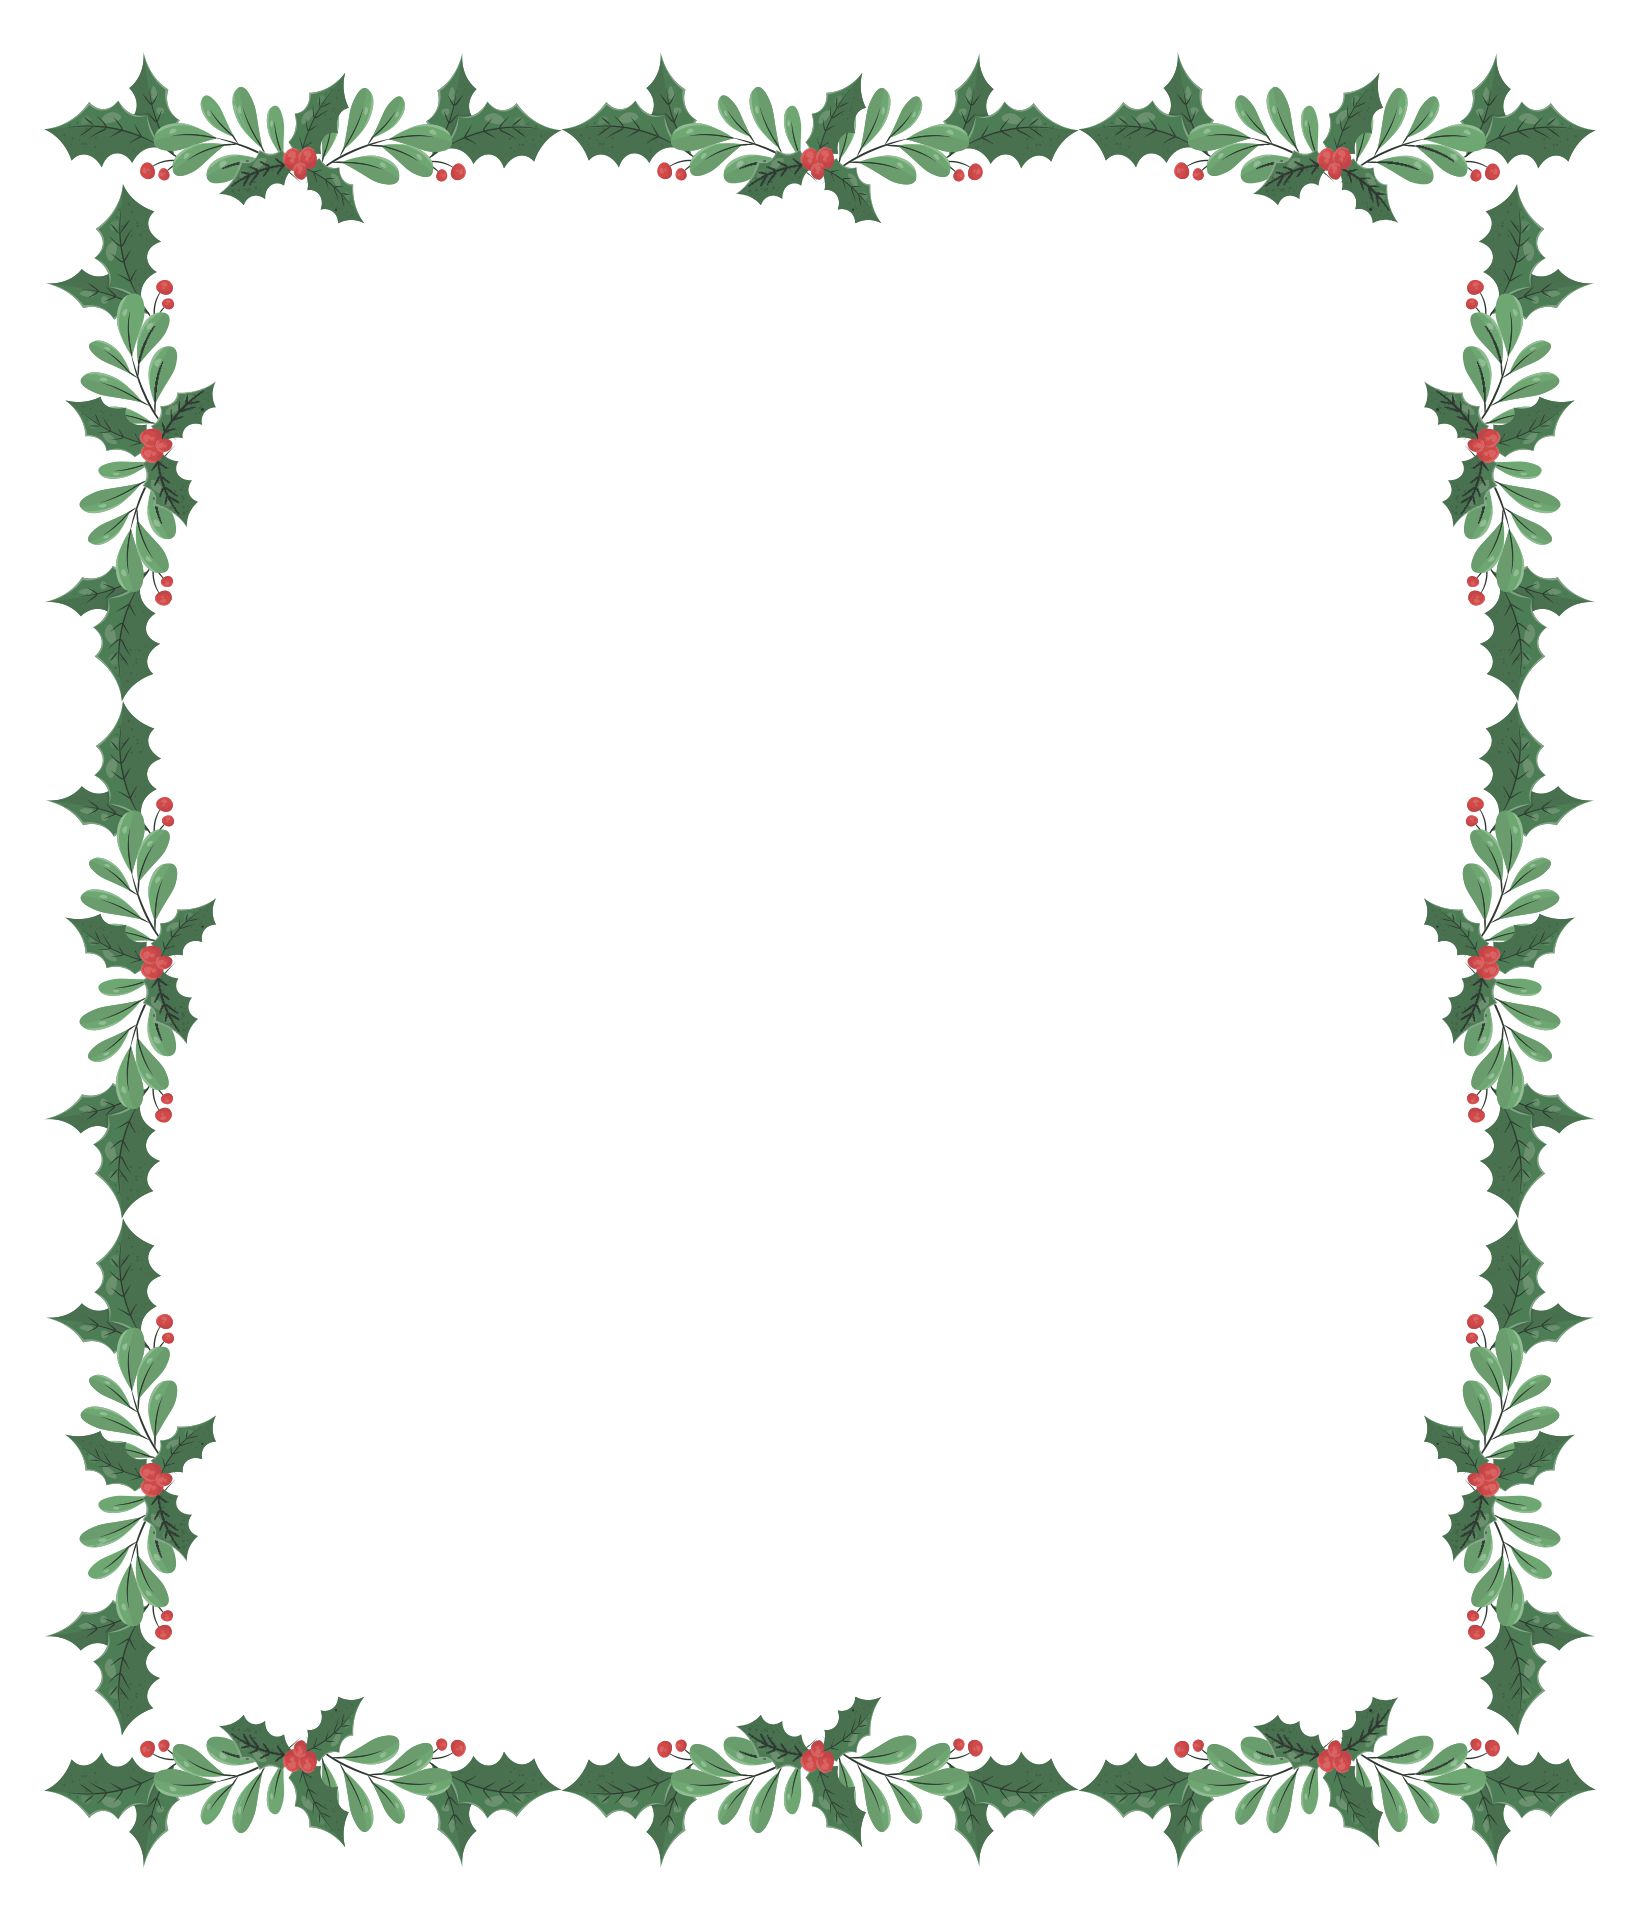 5-best-images-of-free-printable-christmas-border-templates-free